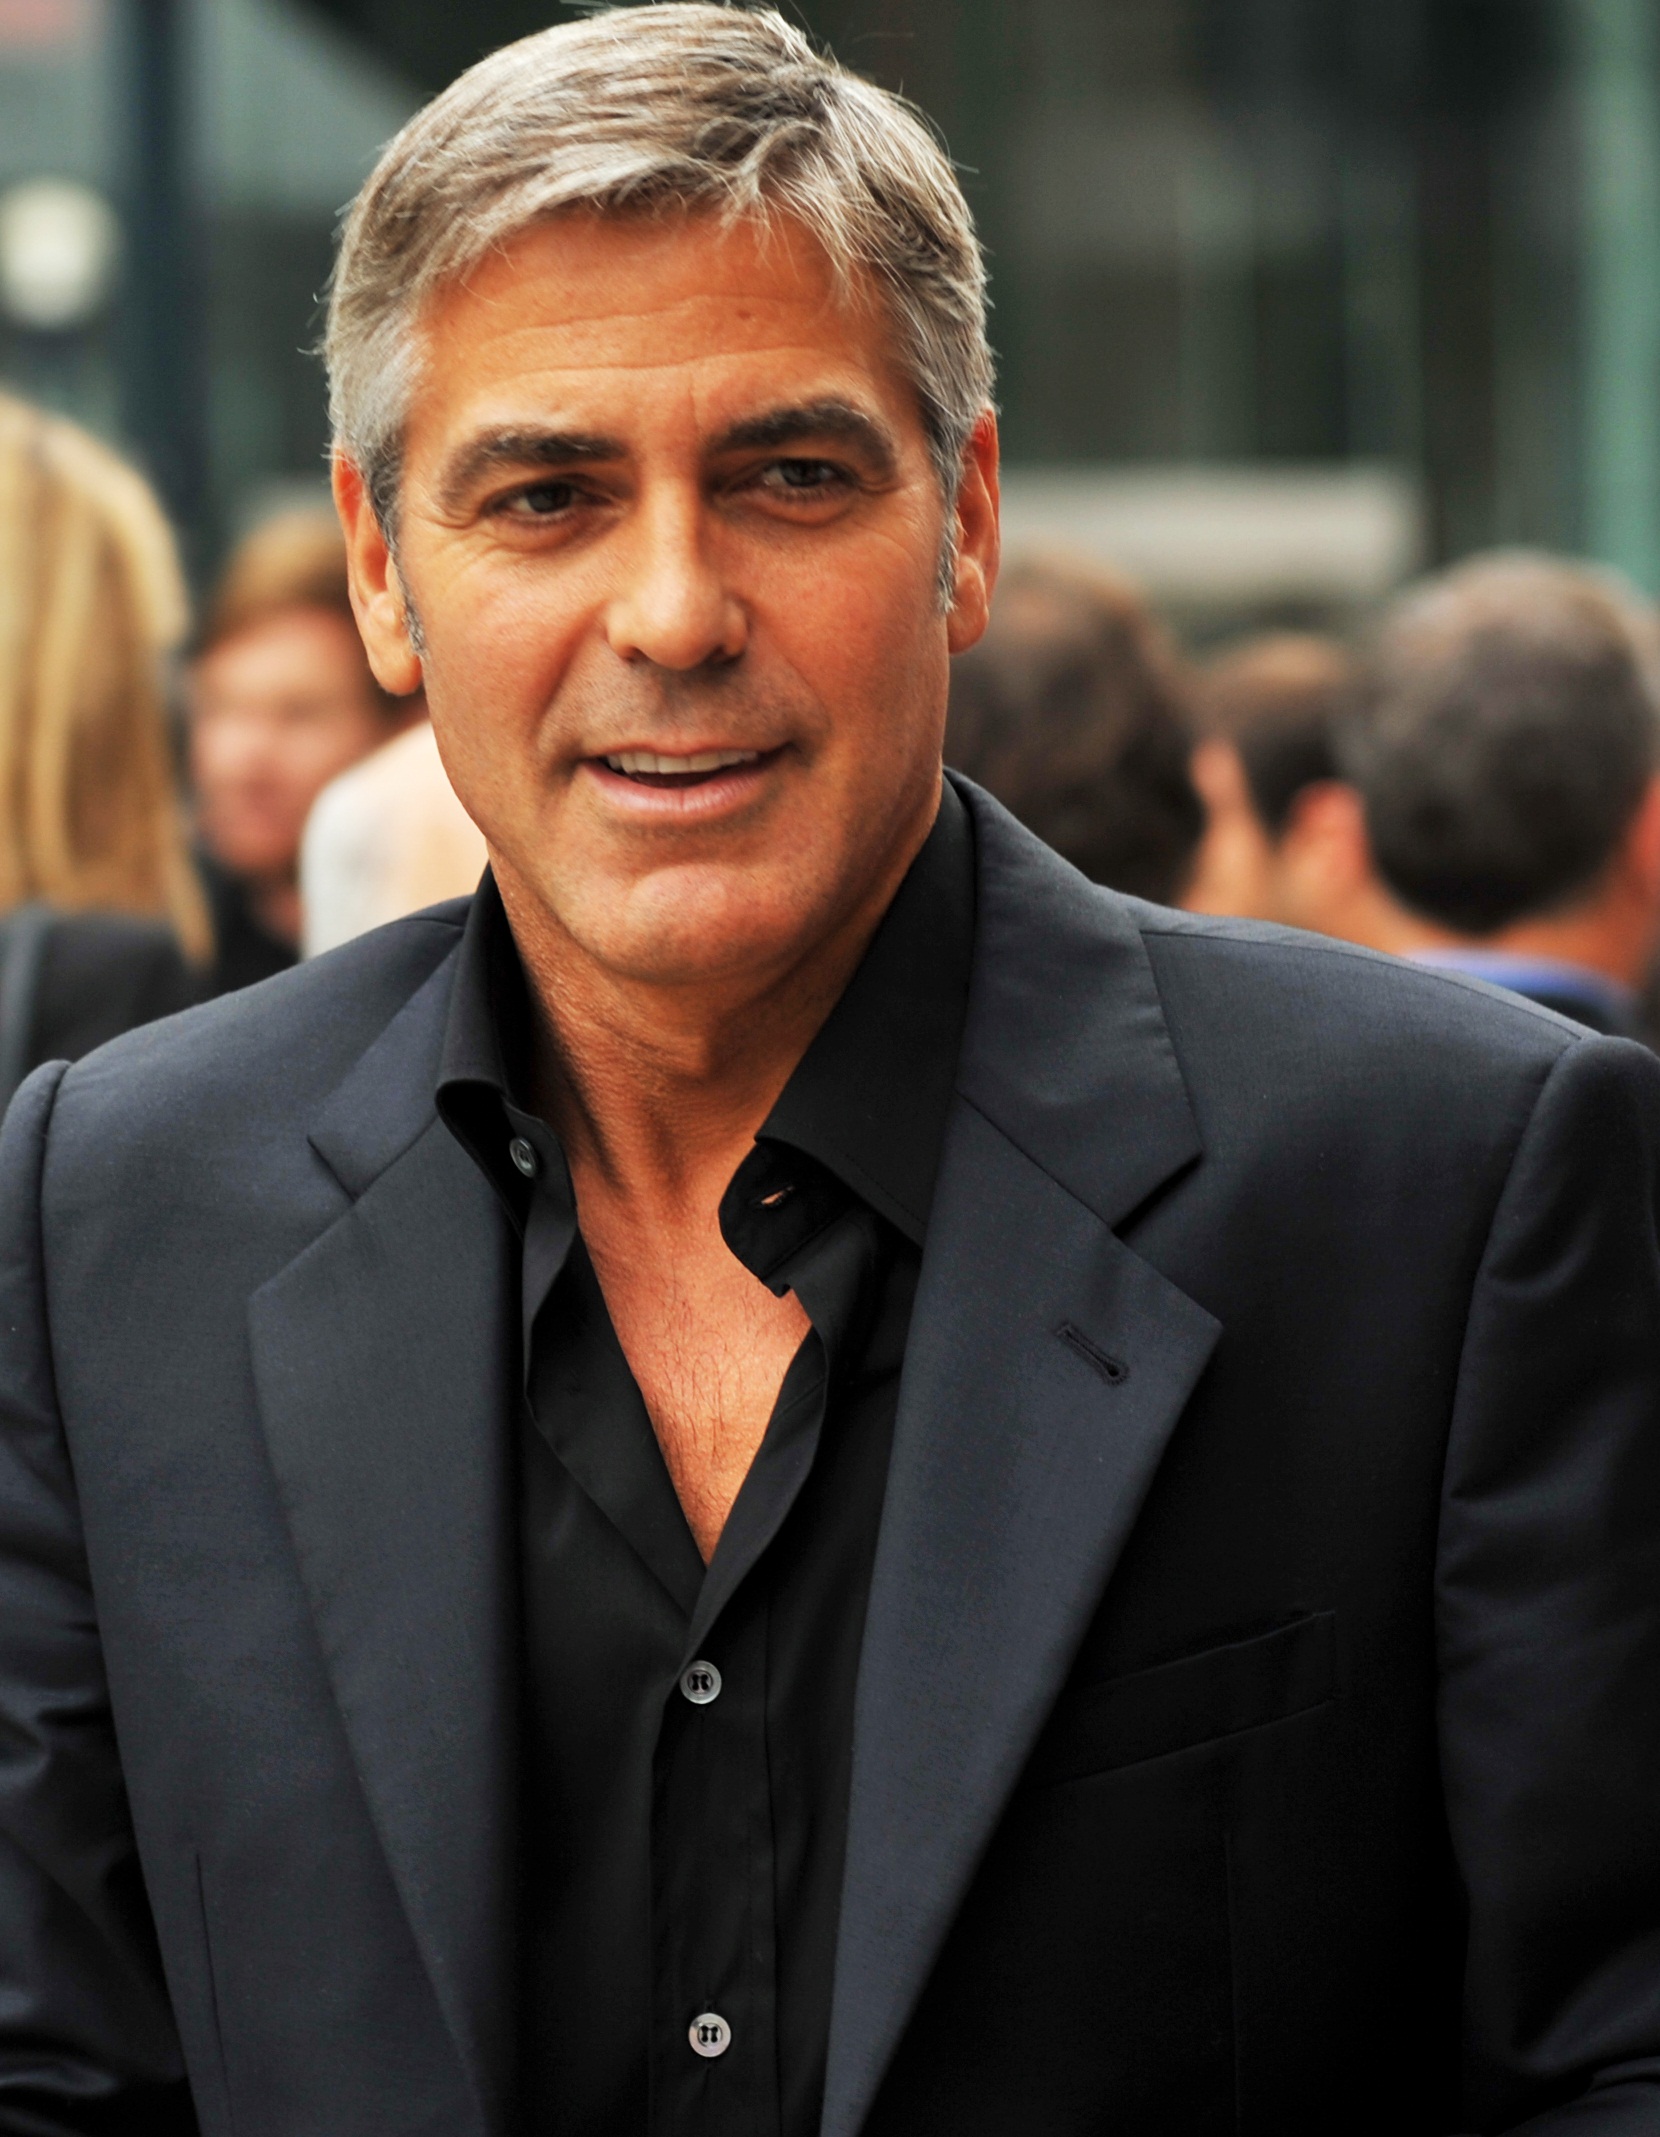 George_Clooney-4_The_Men_Who_Stare_at_Goats_TIFF09_%28cropped%29.jpg